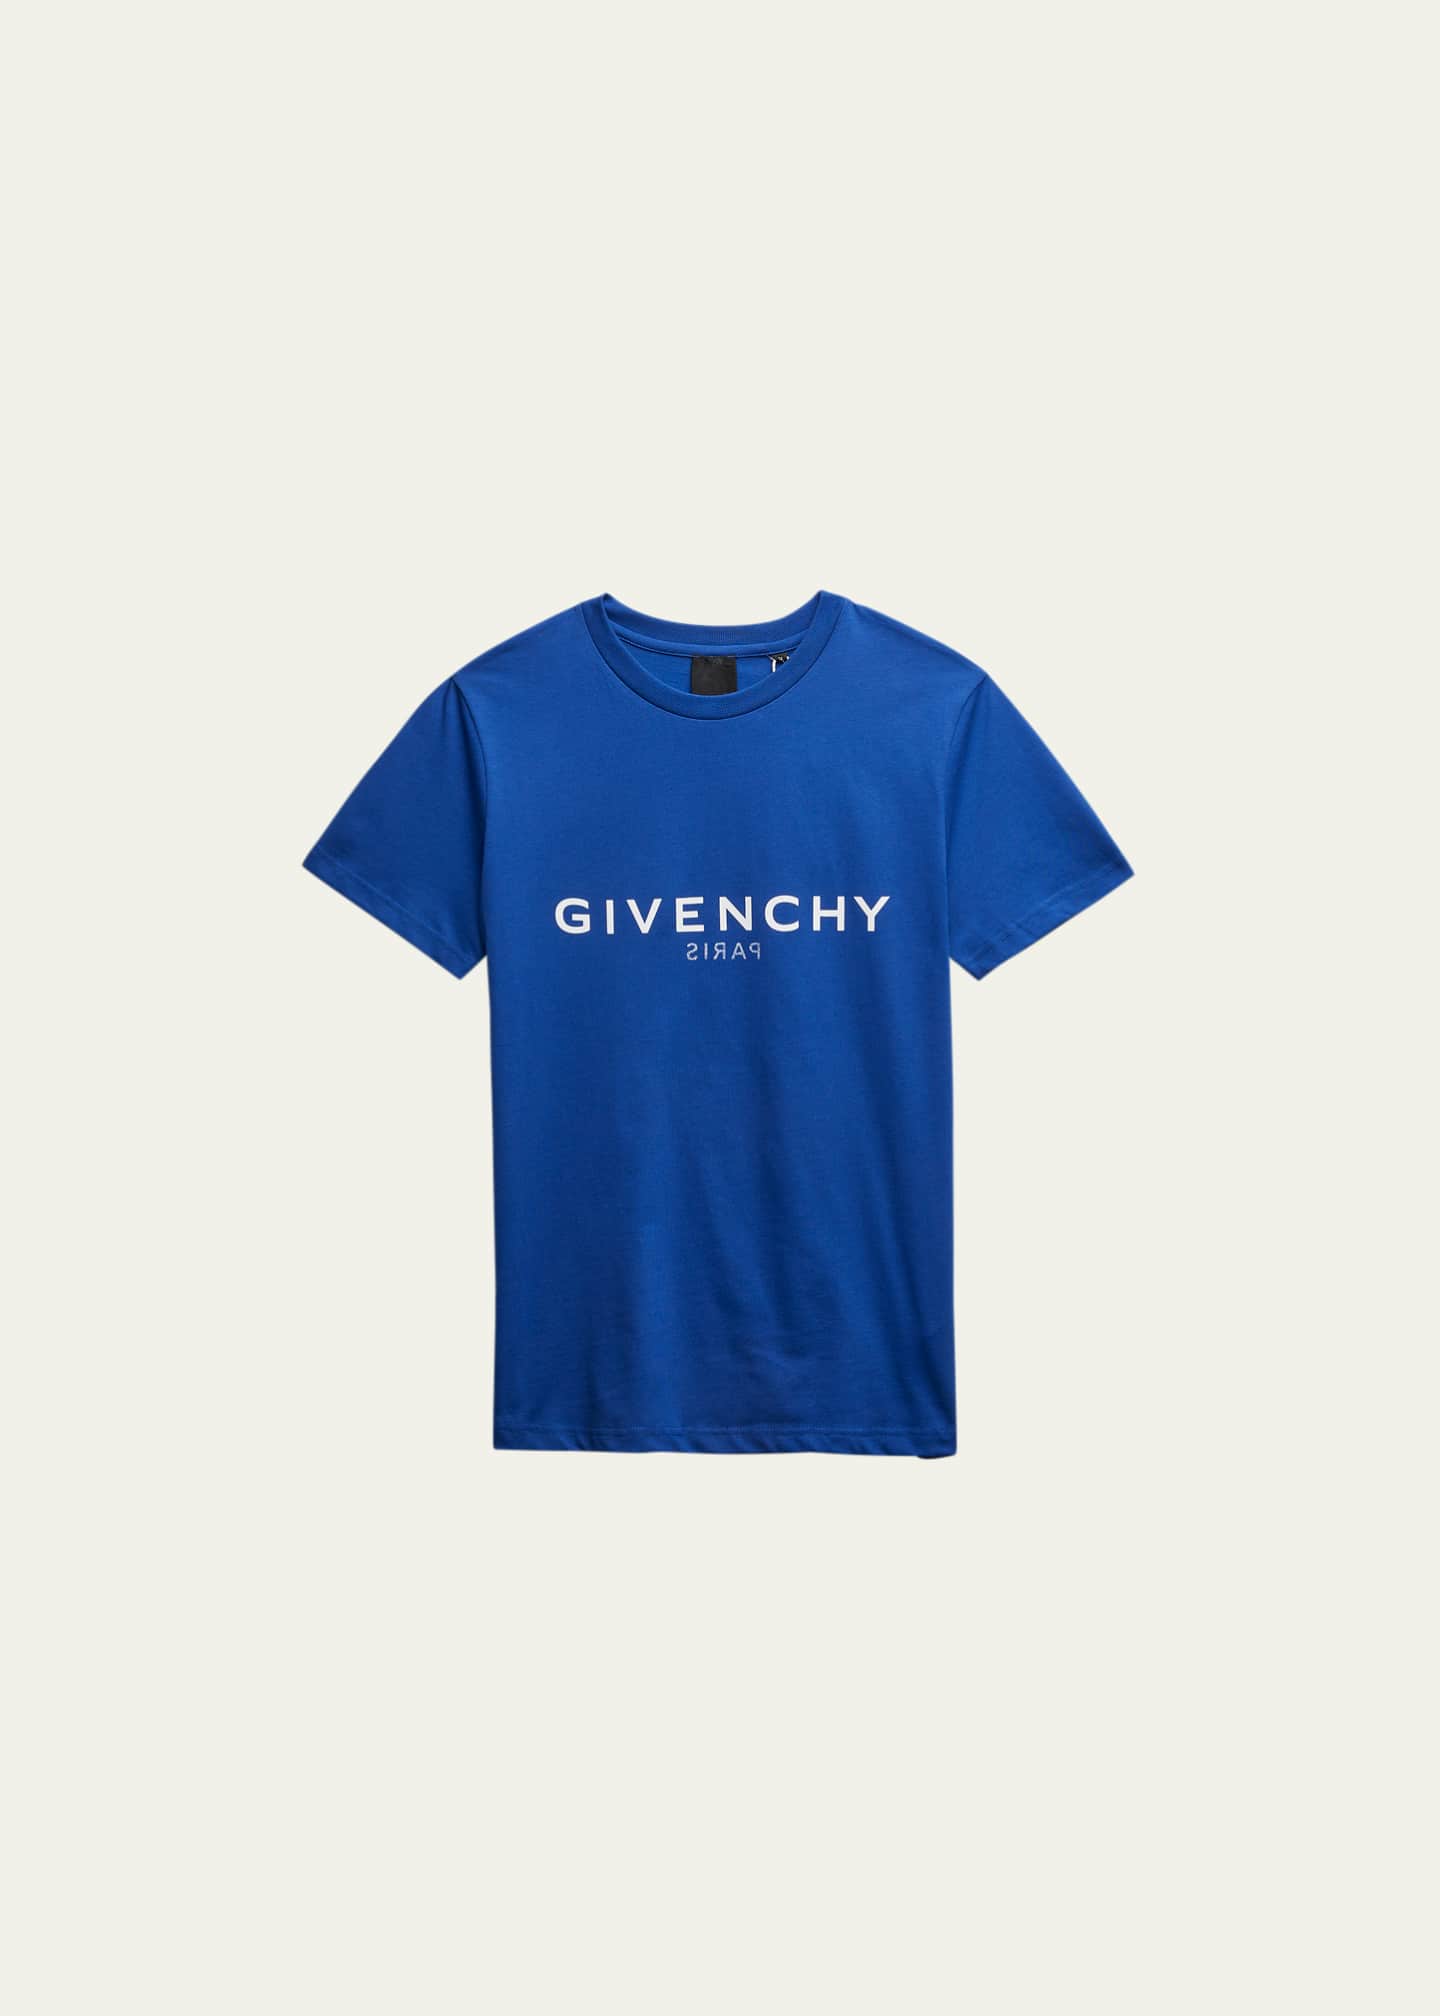 Givenchy Boy's Reversed T-Shirt, 4-6 -